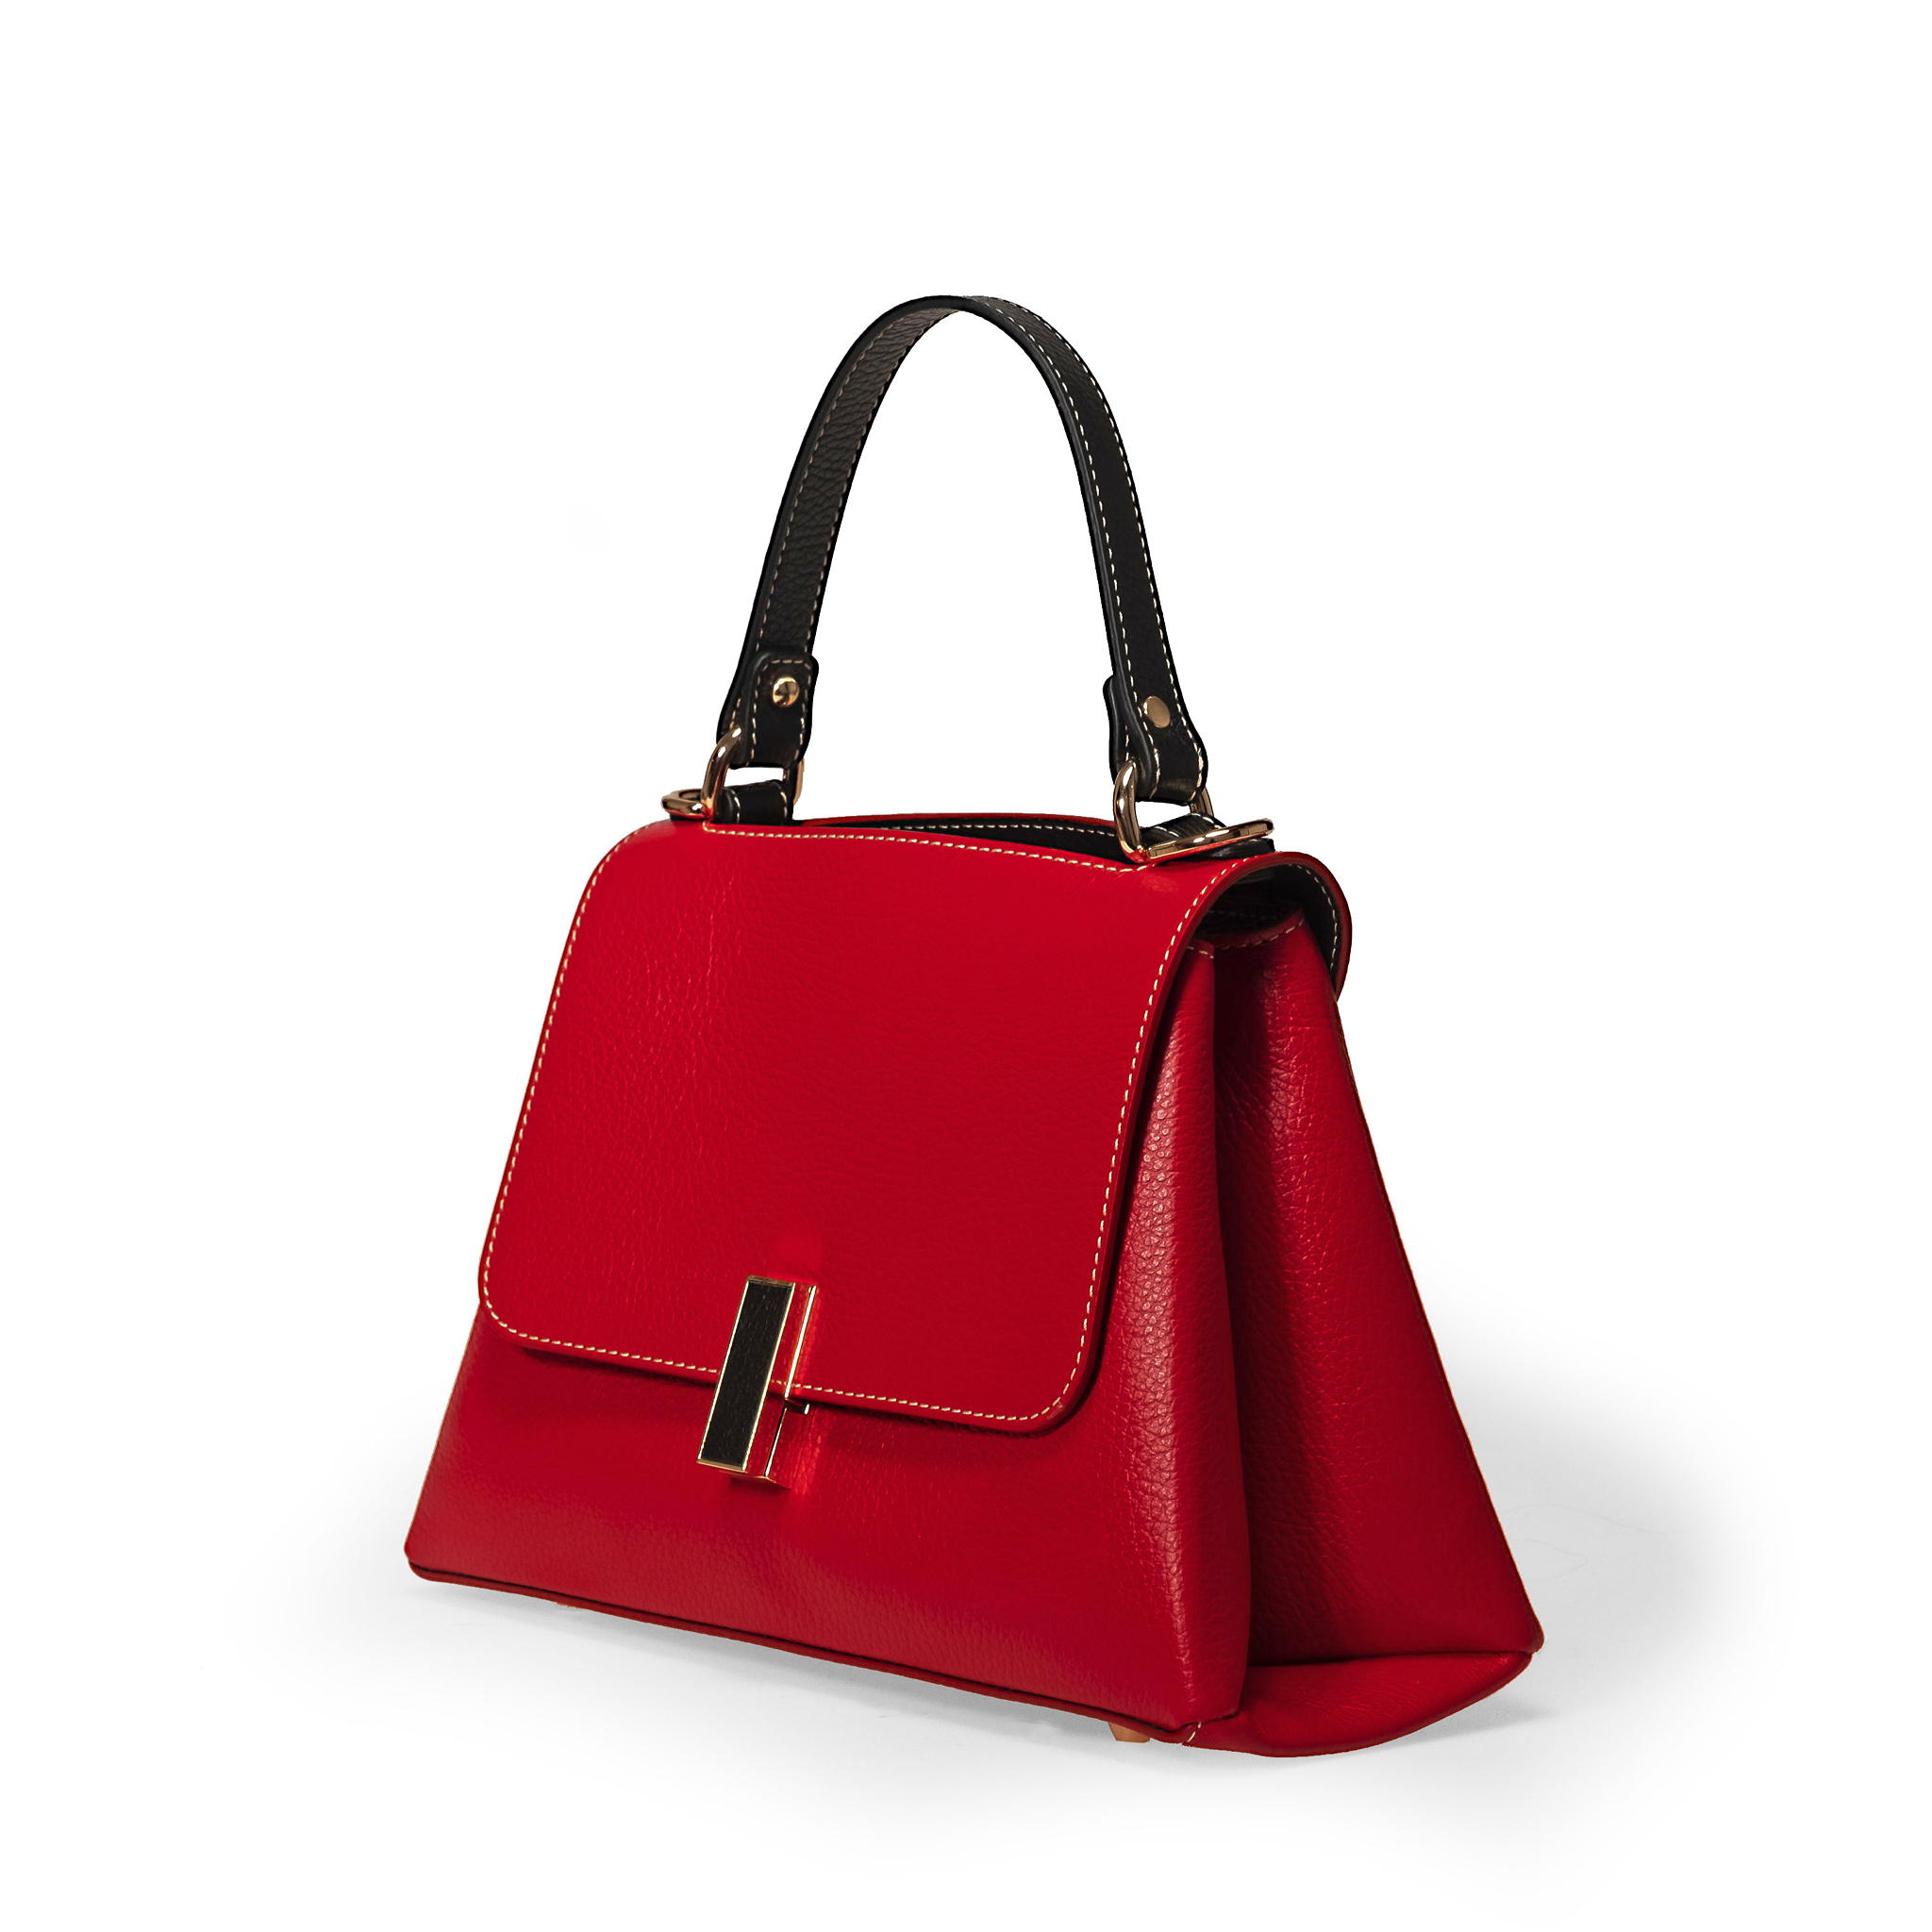 High quality leather handbags Made in Italy by Bellini. Wholesale, OEM, private label handbags.